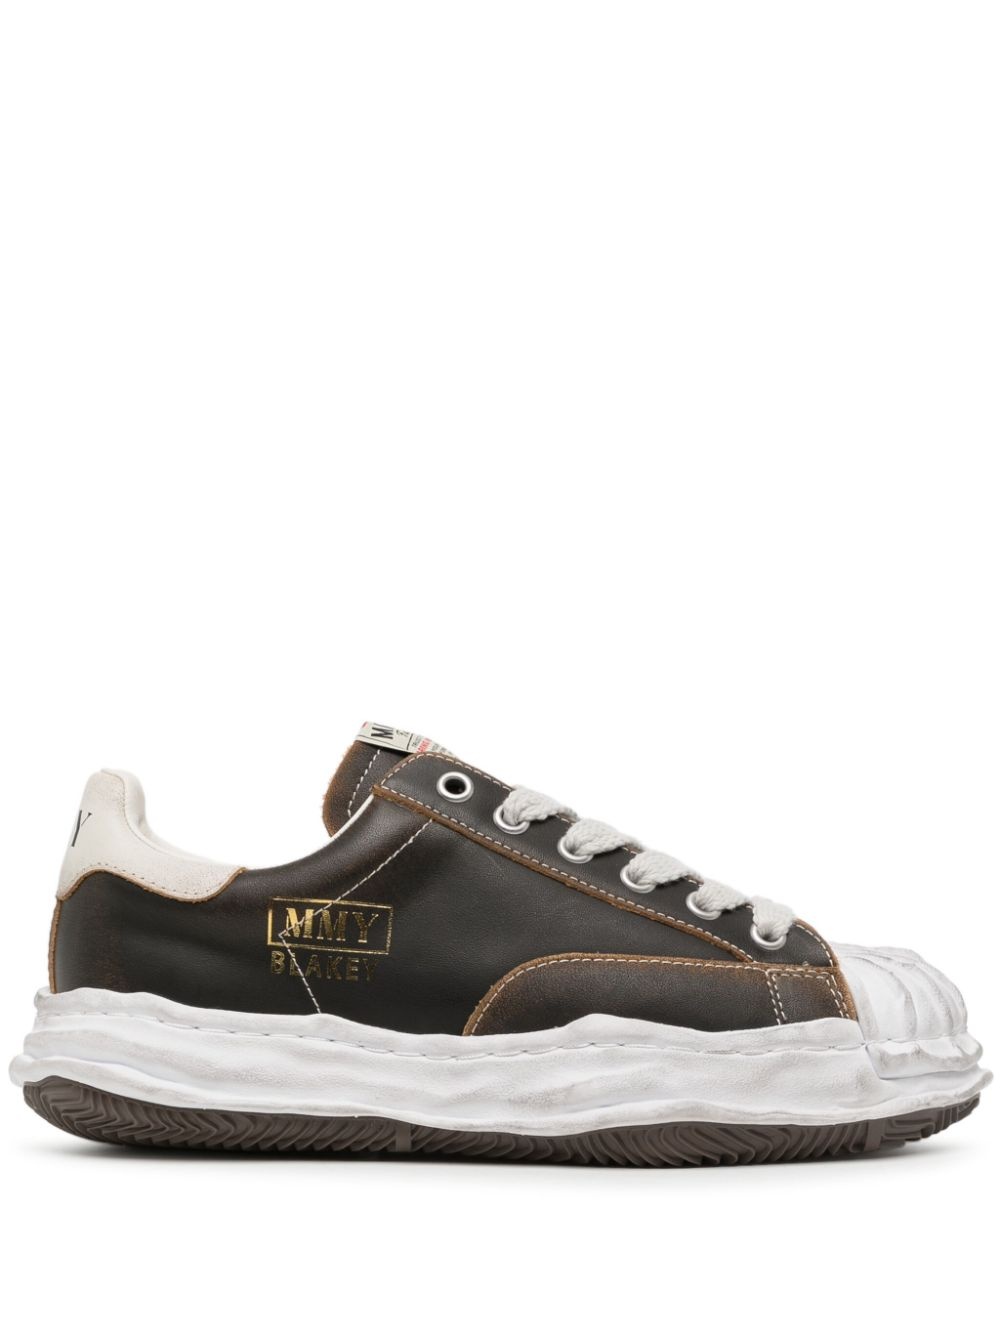 Blakey OG Sole leather sneakers - 1